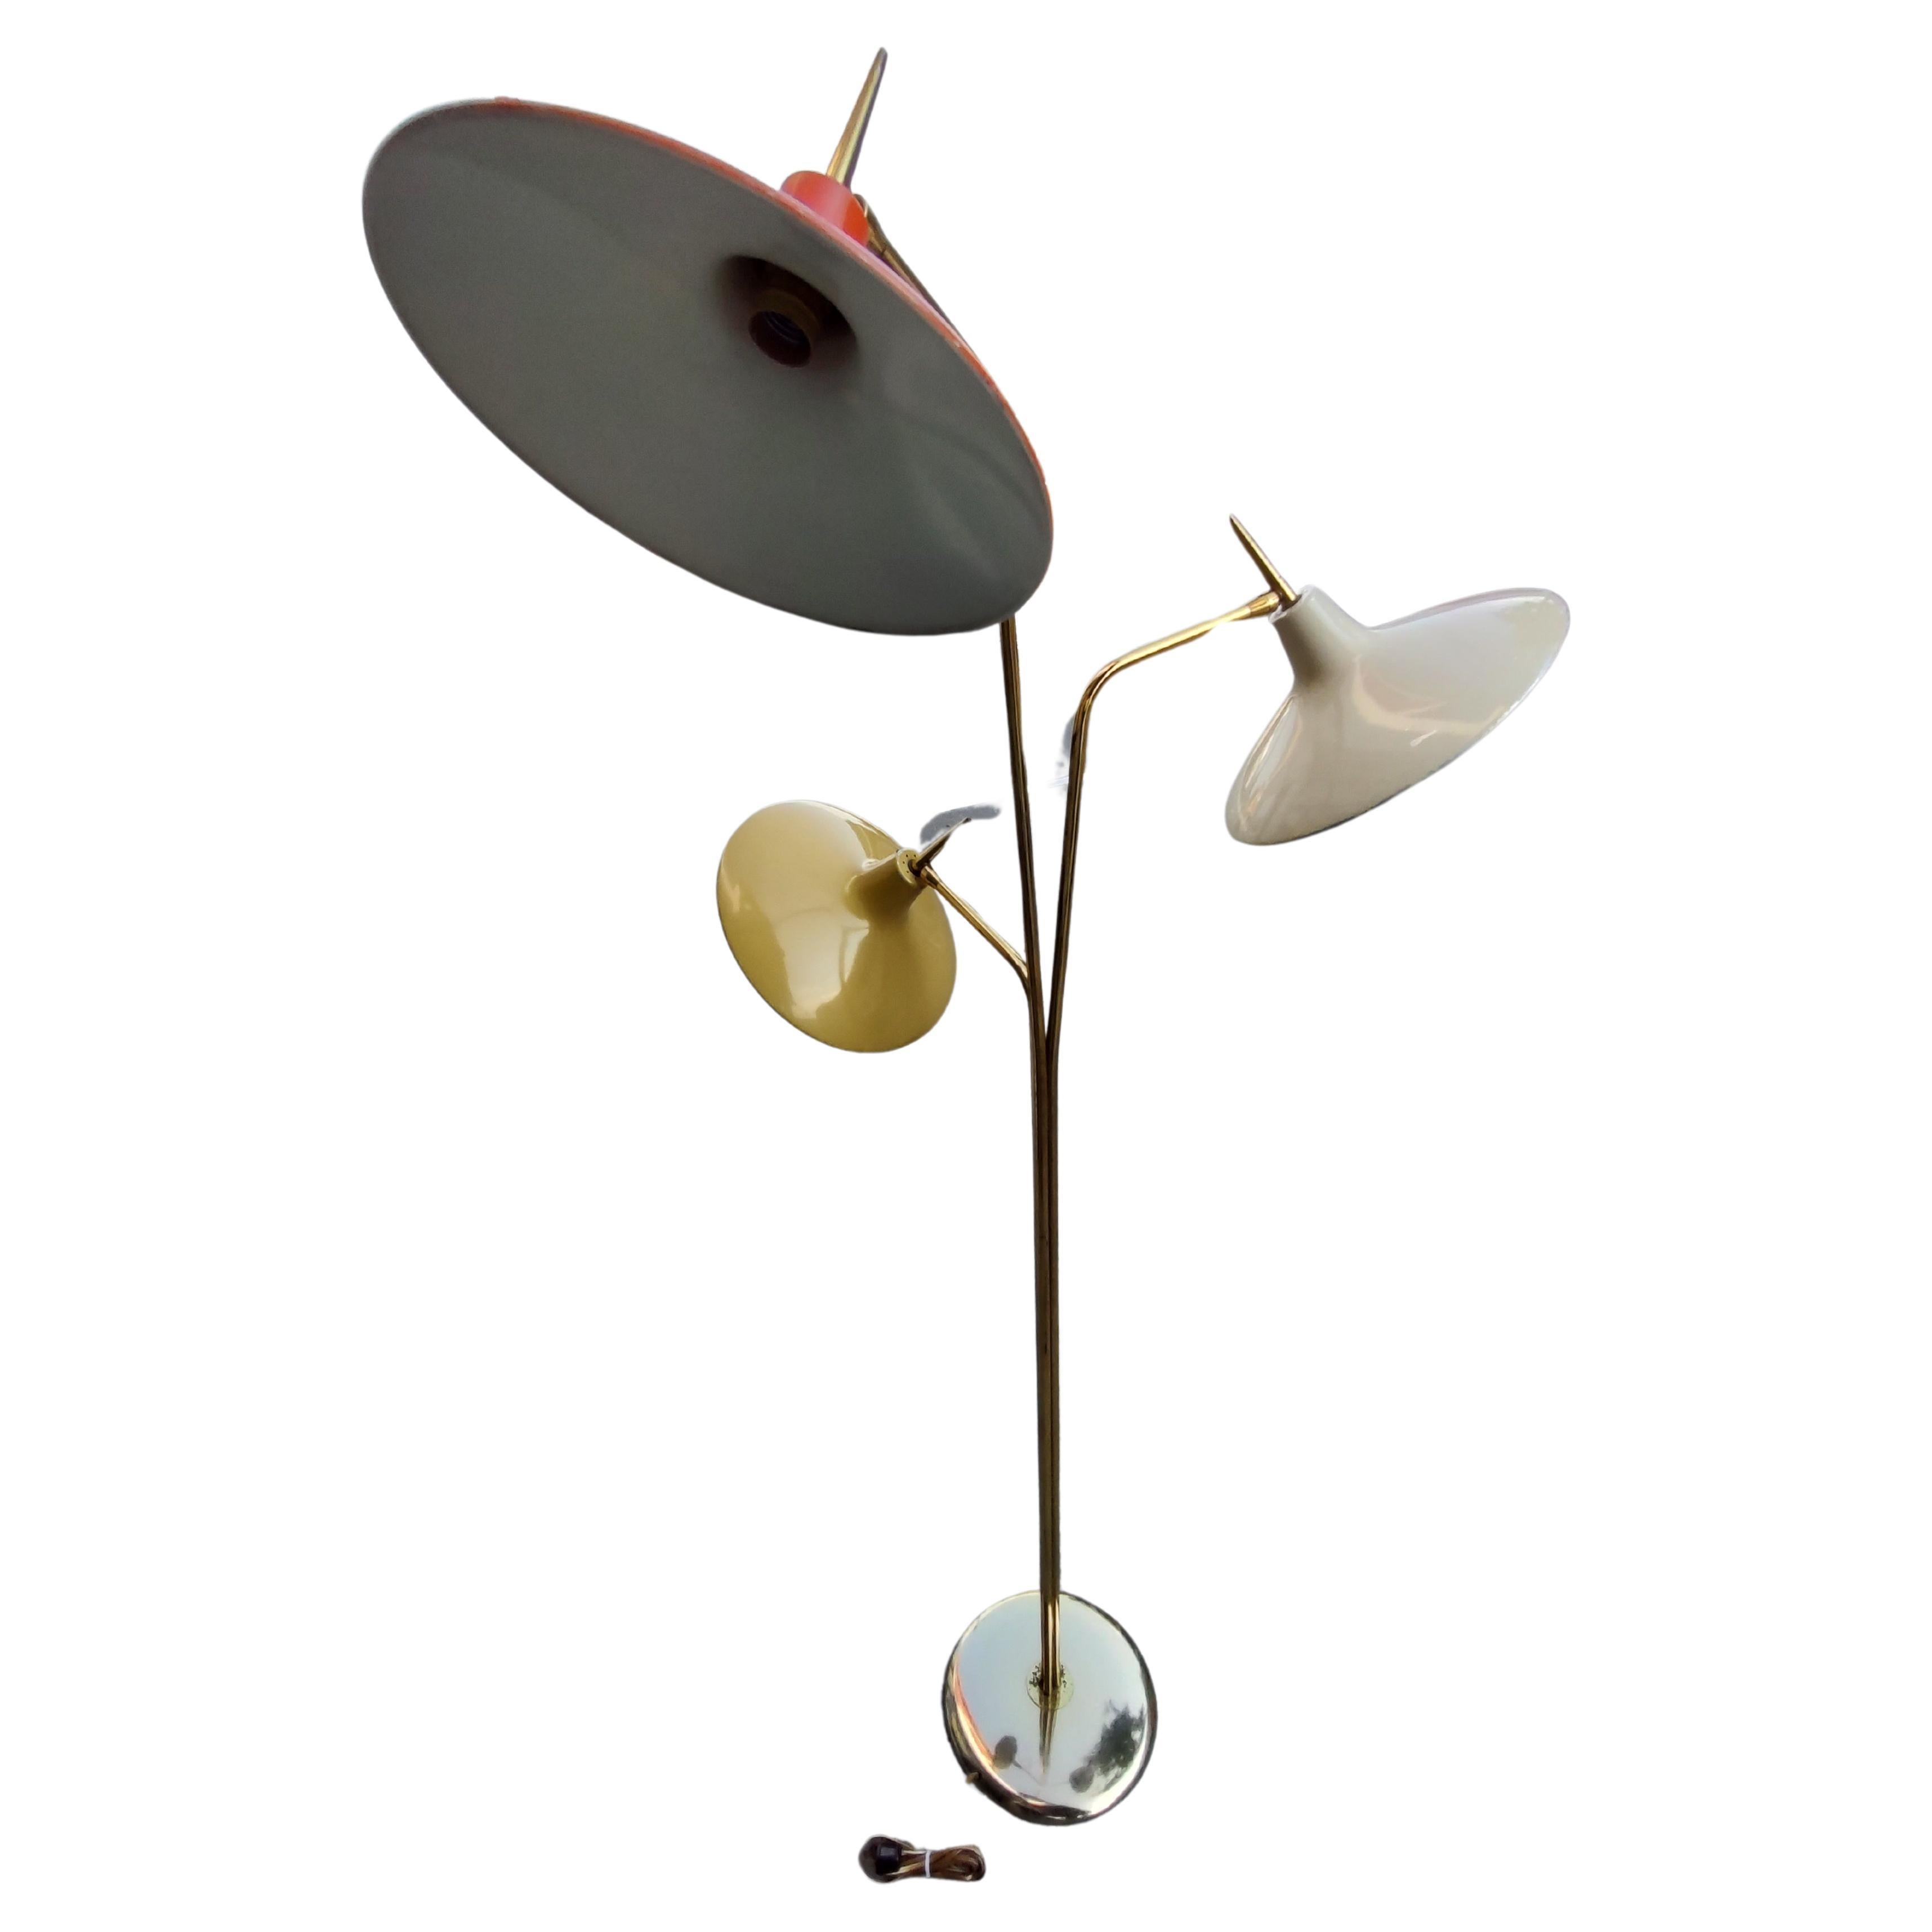 Hand-Crafted Mid Century Modern Sculptural Italian Triennial Floor Lamp Enameled Shades For Sale